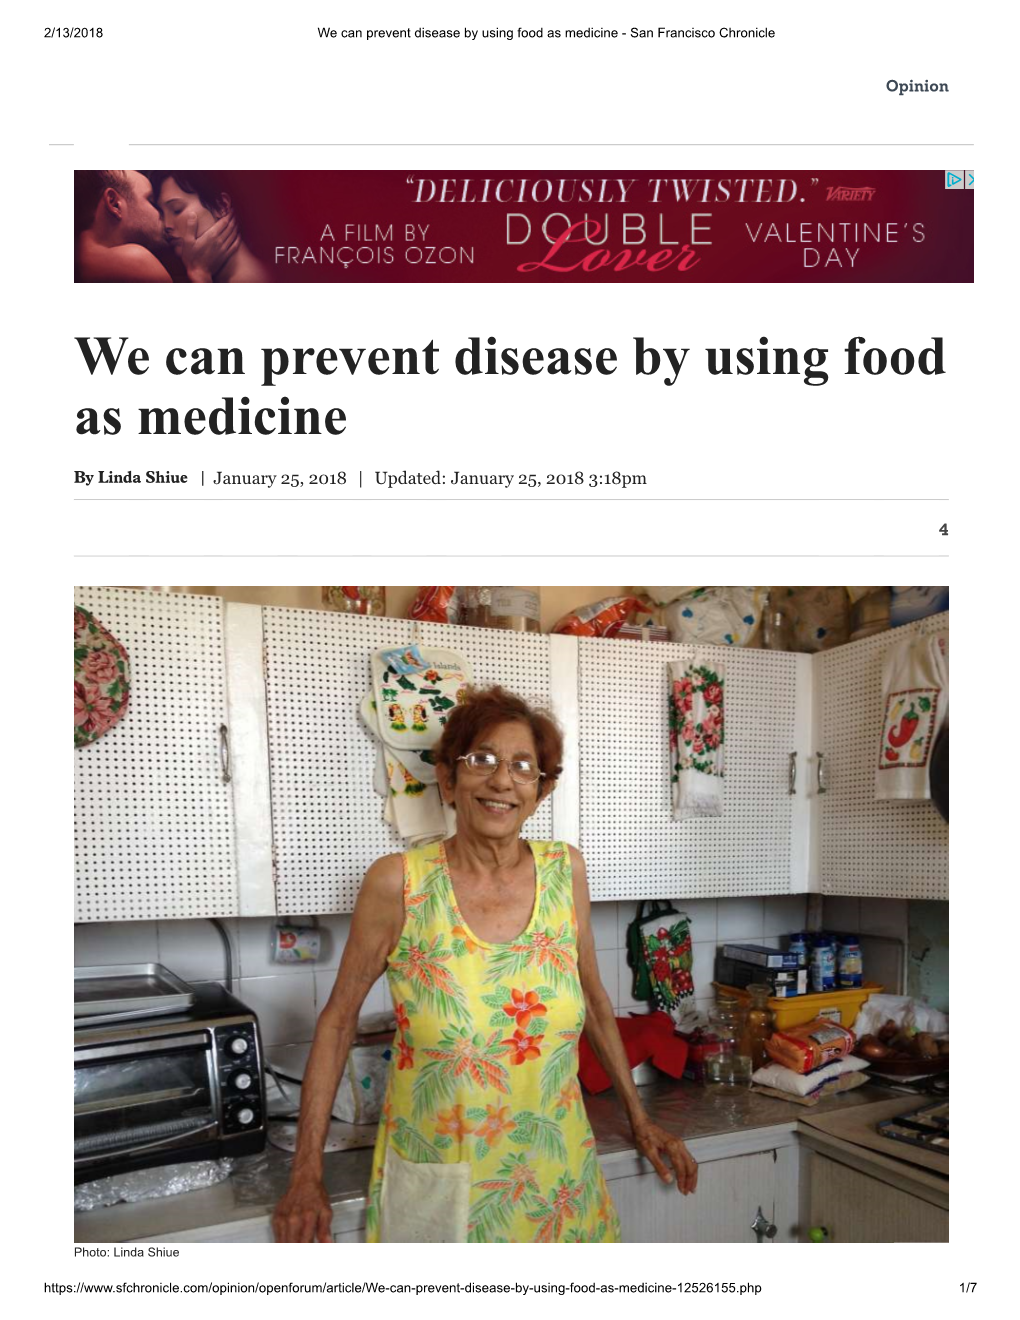 We Can Prevent Disease by Using Food As Medicine - San Francisco Chronicle